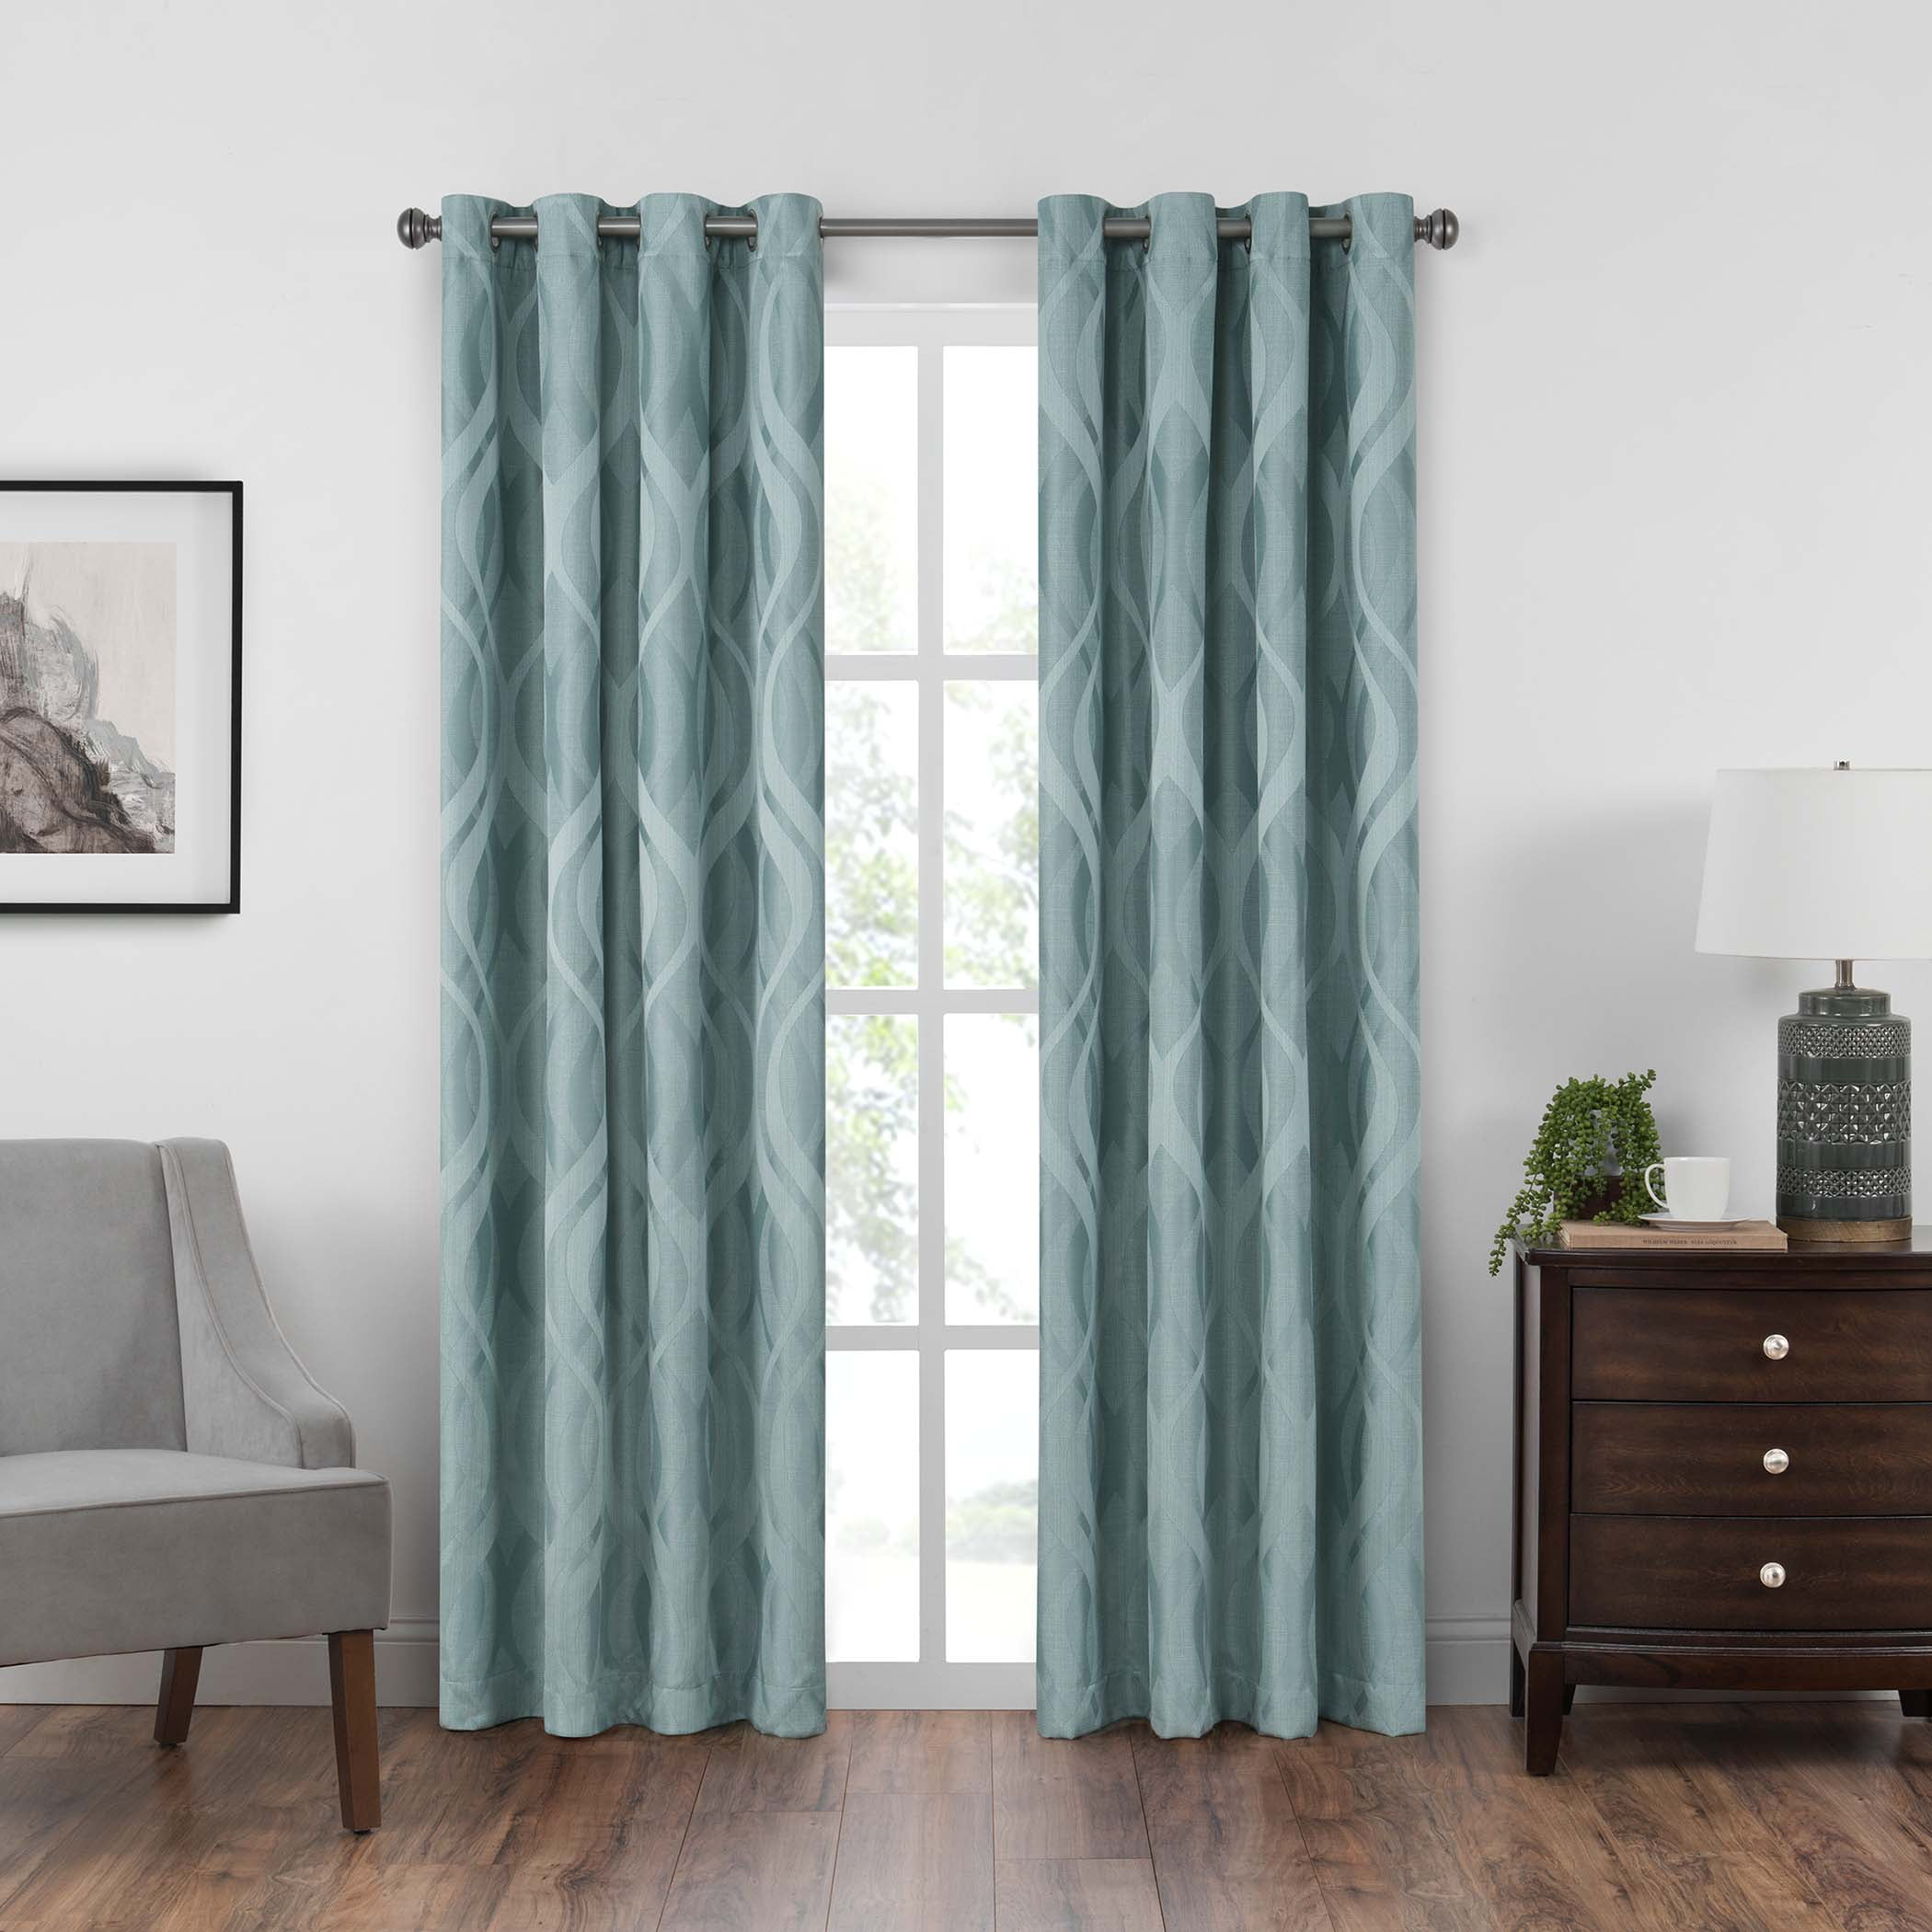 Grey ECLIPSE Blackout Curtains for Bedroom Dixon 52 x 63 Insulated Darkening Single Panel Rod Pocket Window Treatment Living Room